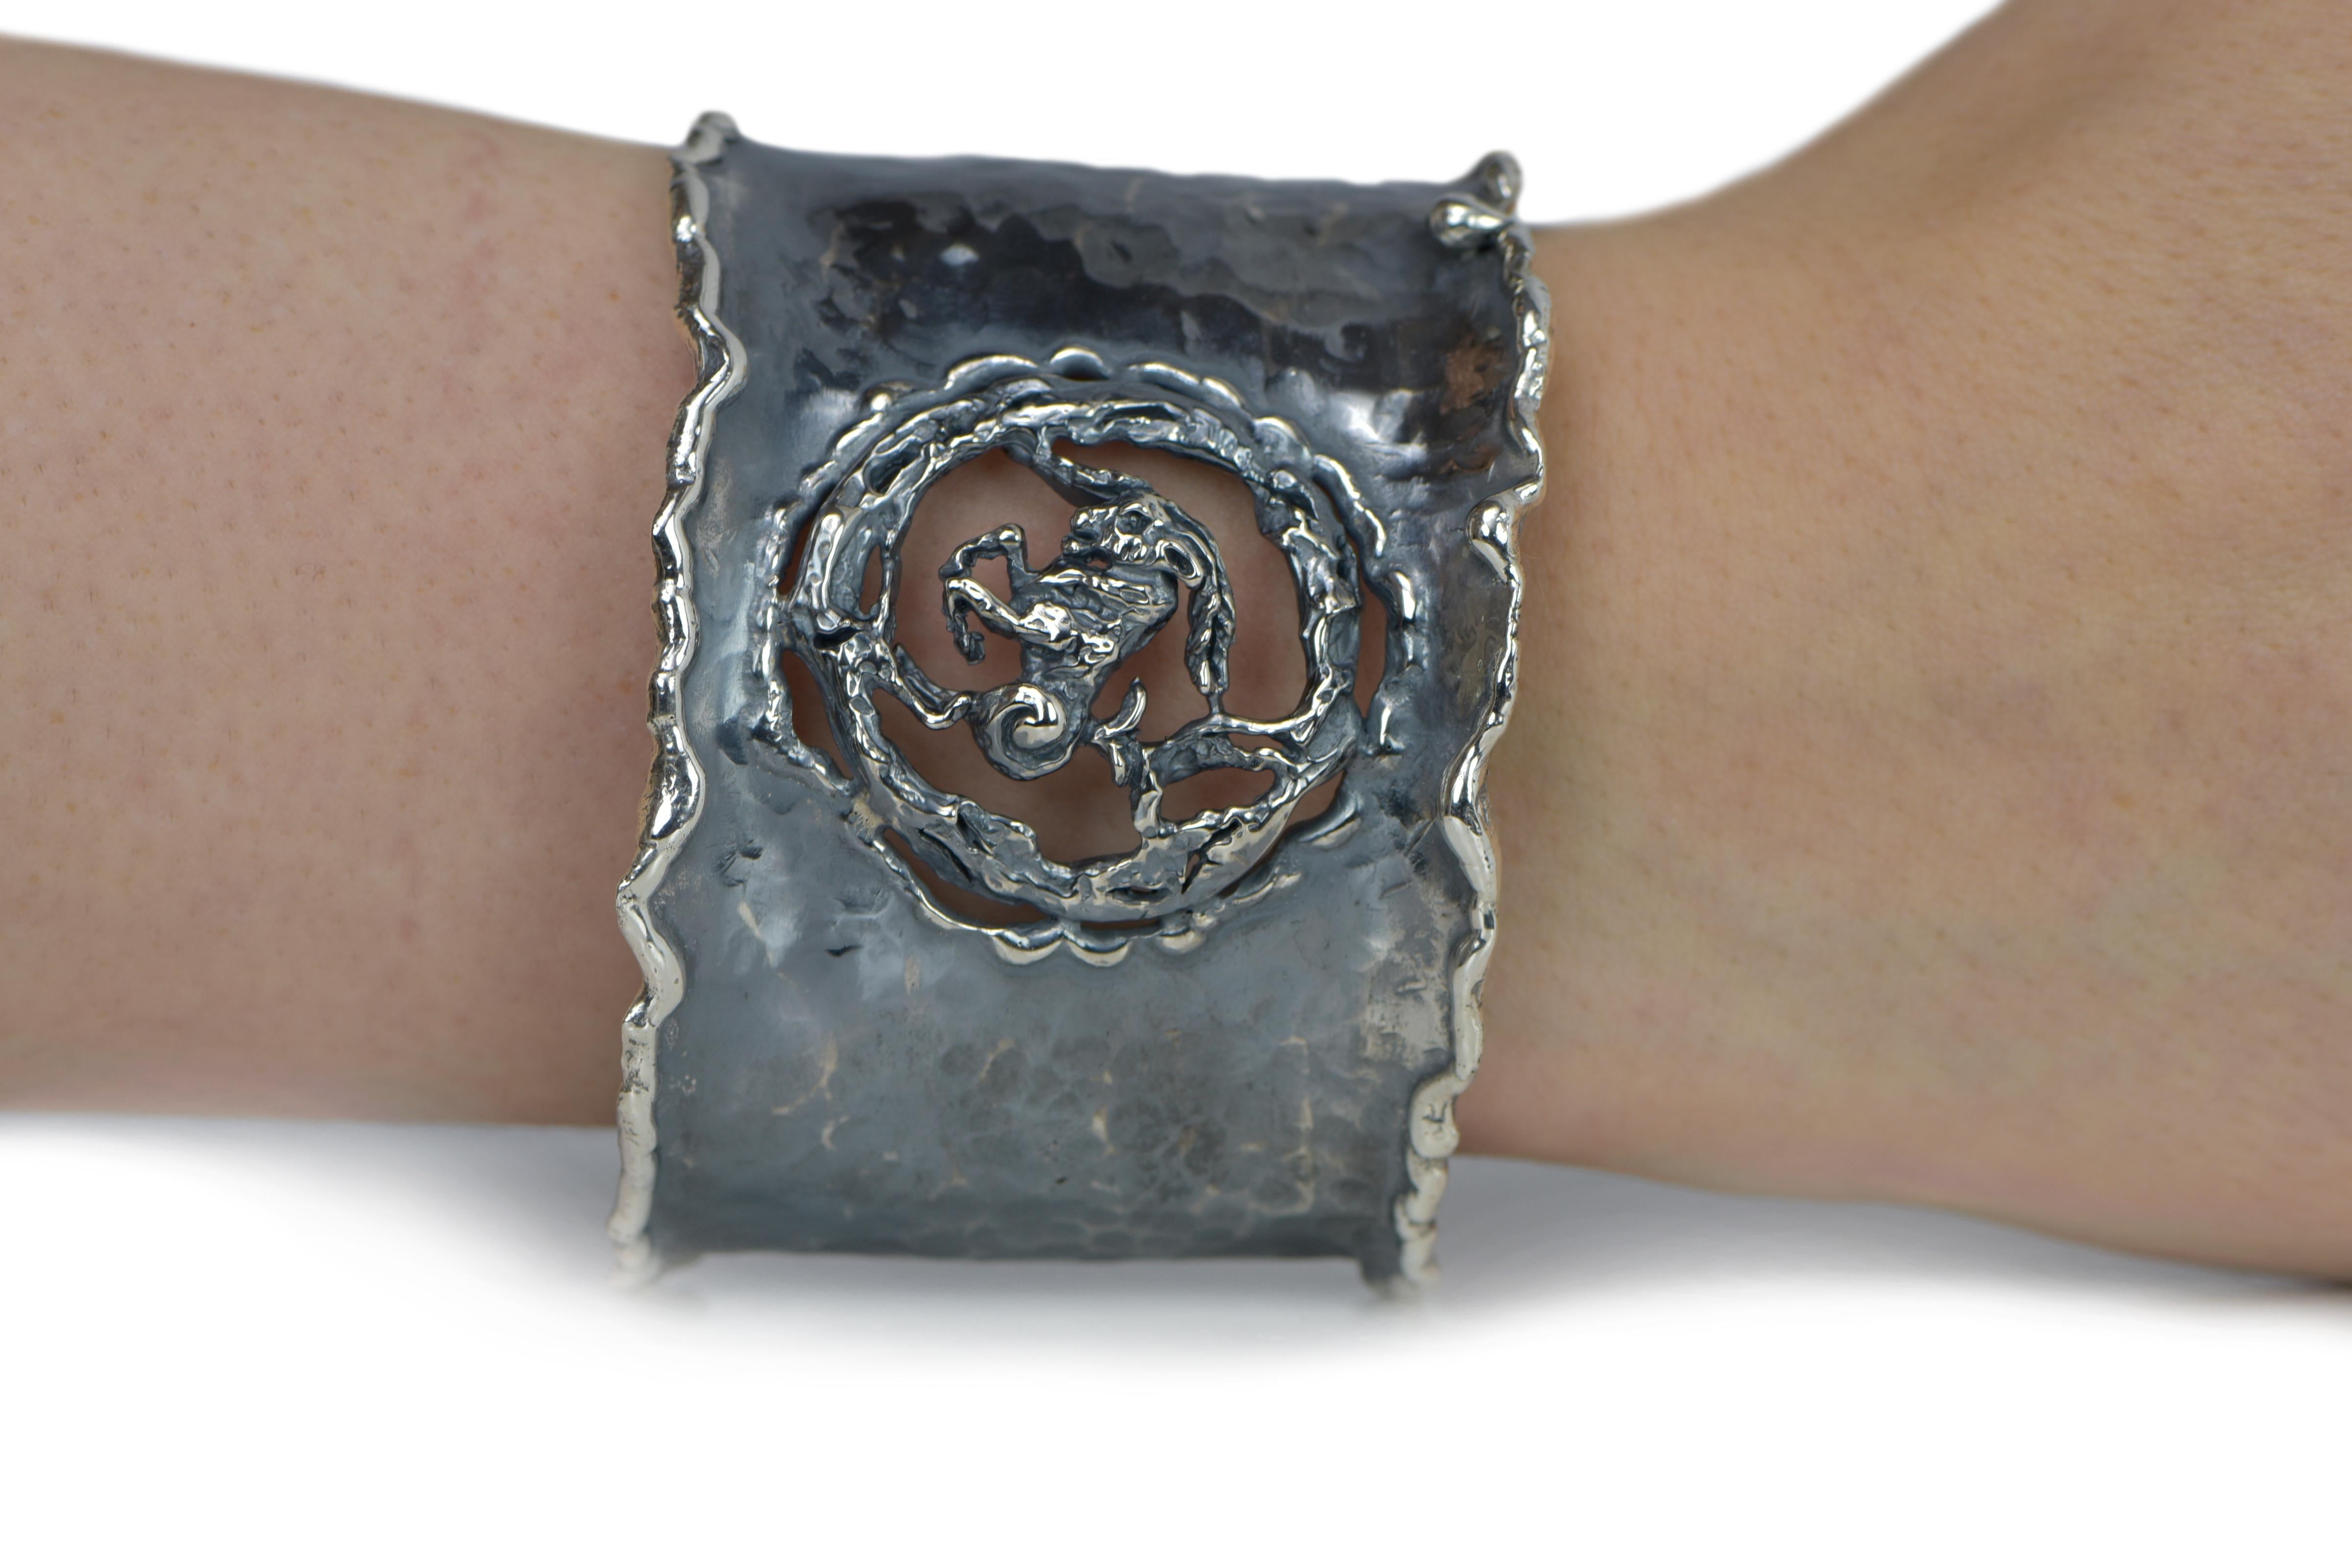 Hand Forged Silver Capricorn Adjustable Cuff Bracelet. About 2.5 inches wide. The metal does not contain any additional alloys that could compromise the strength or quality of the piece. Each Organic Silver Cuff Bracelet takes about 8 hours to